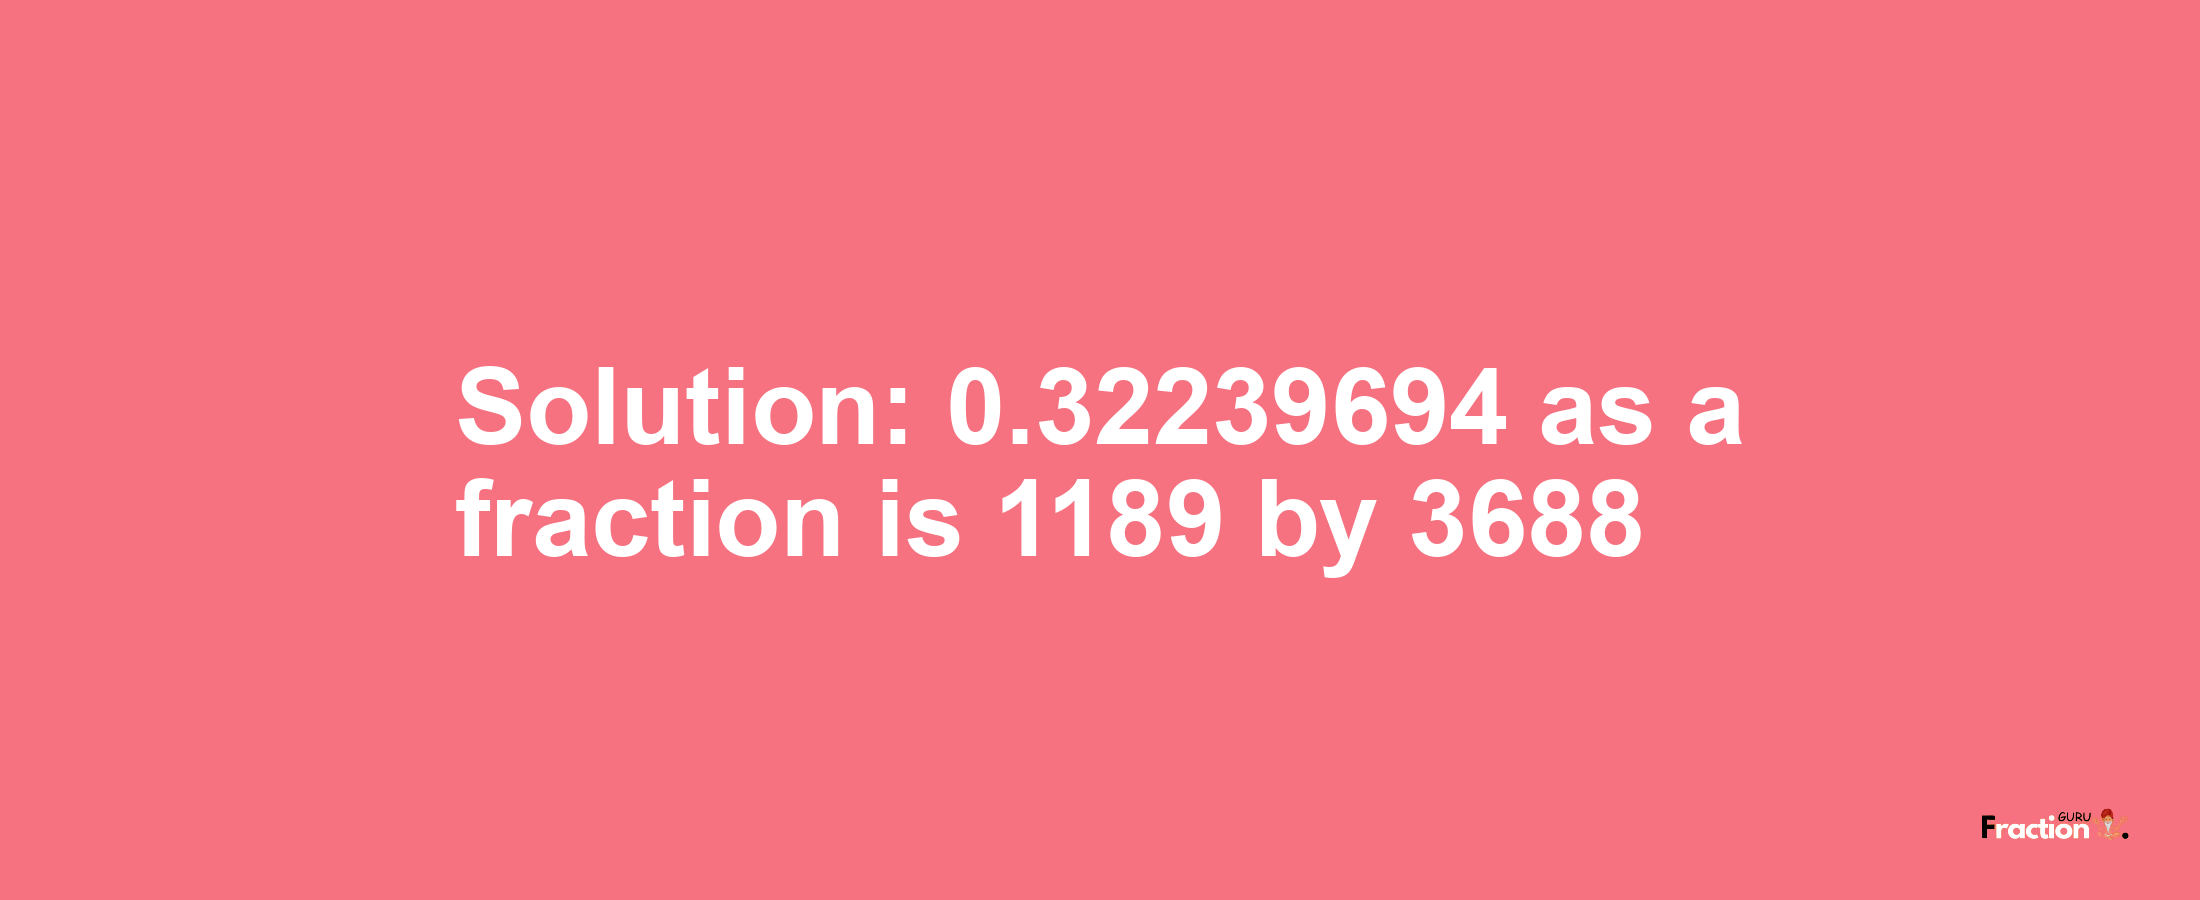 Solution:0.32239694 as a fraction is 1189/3688